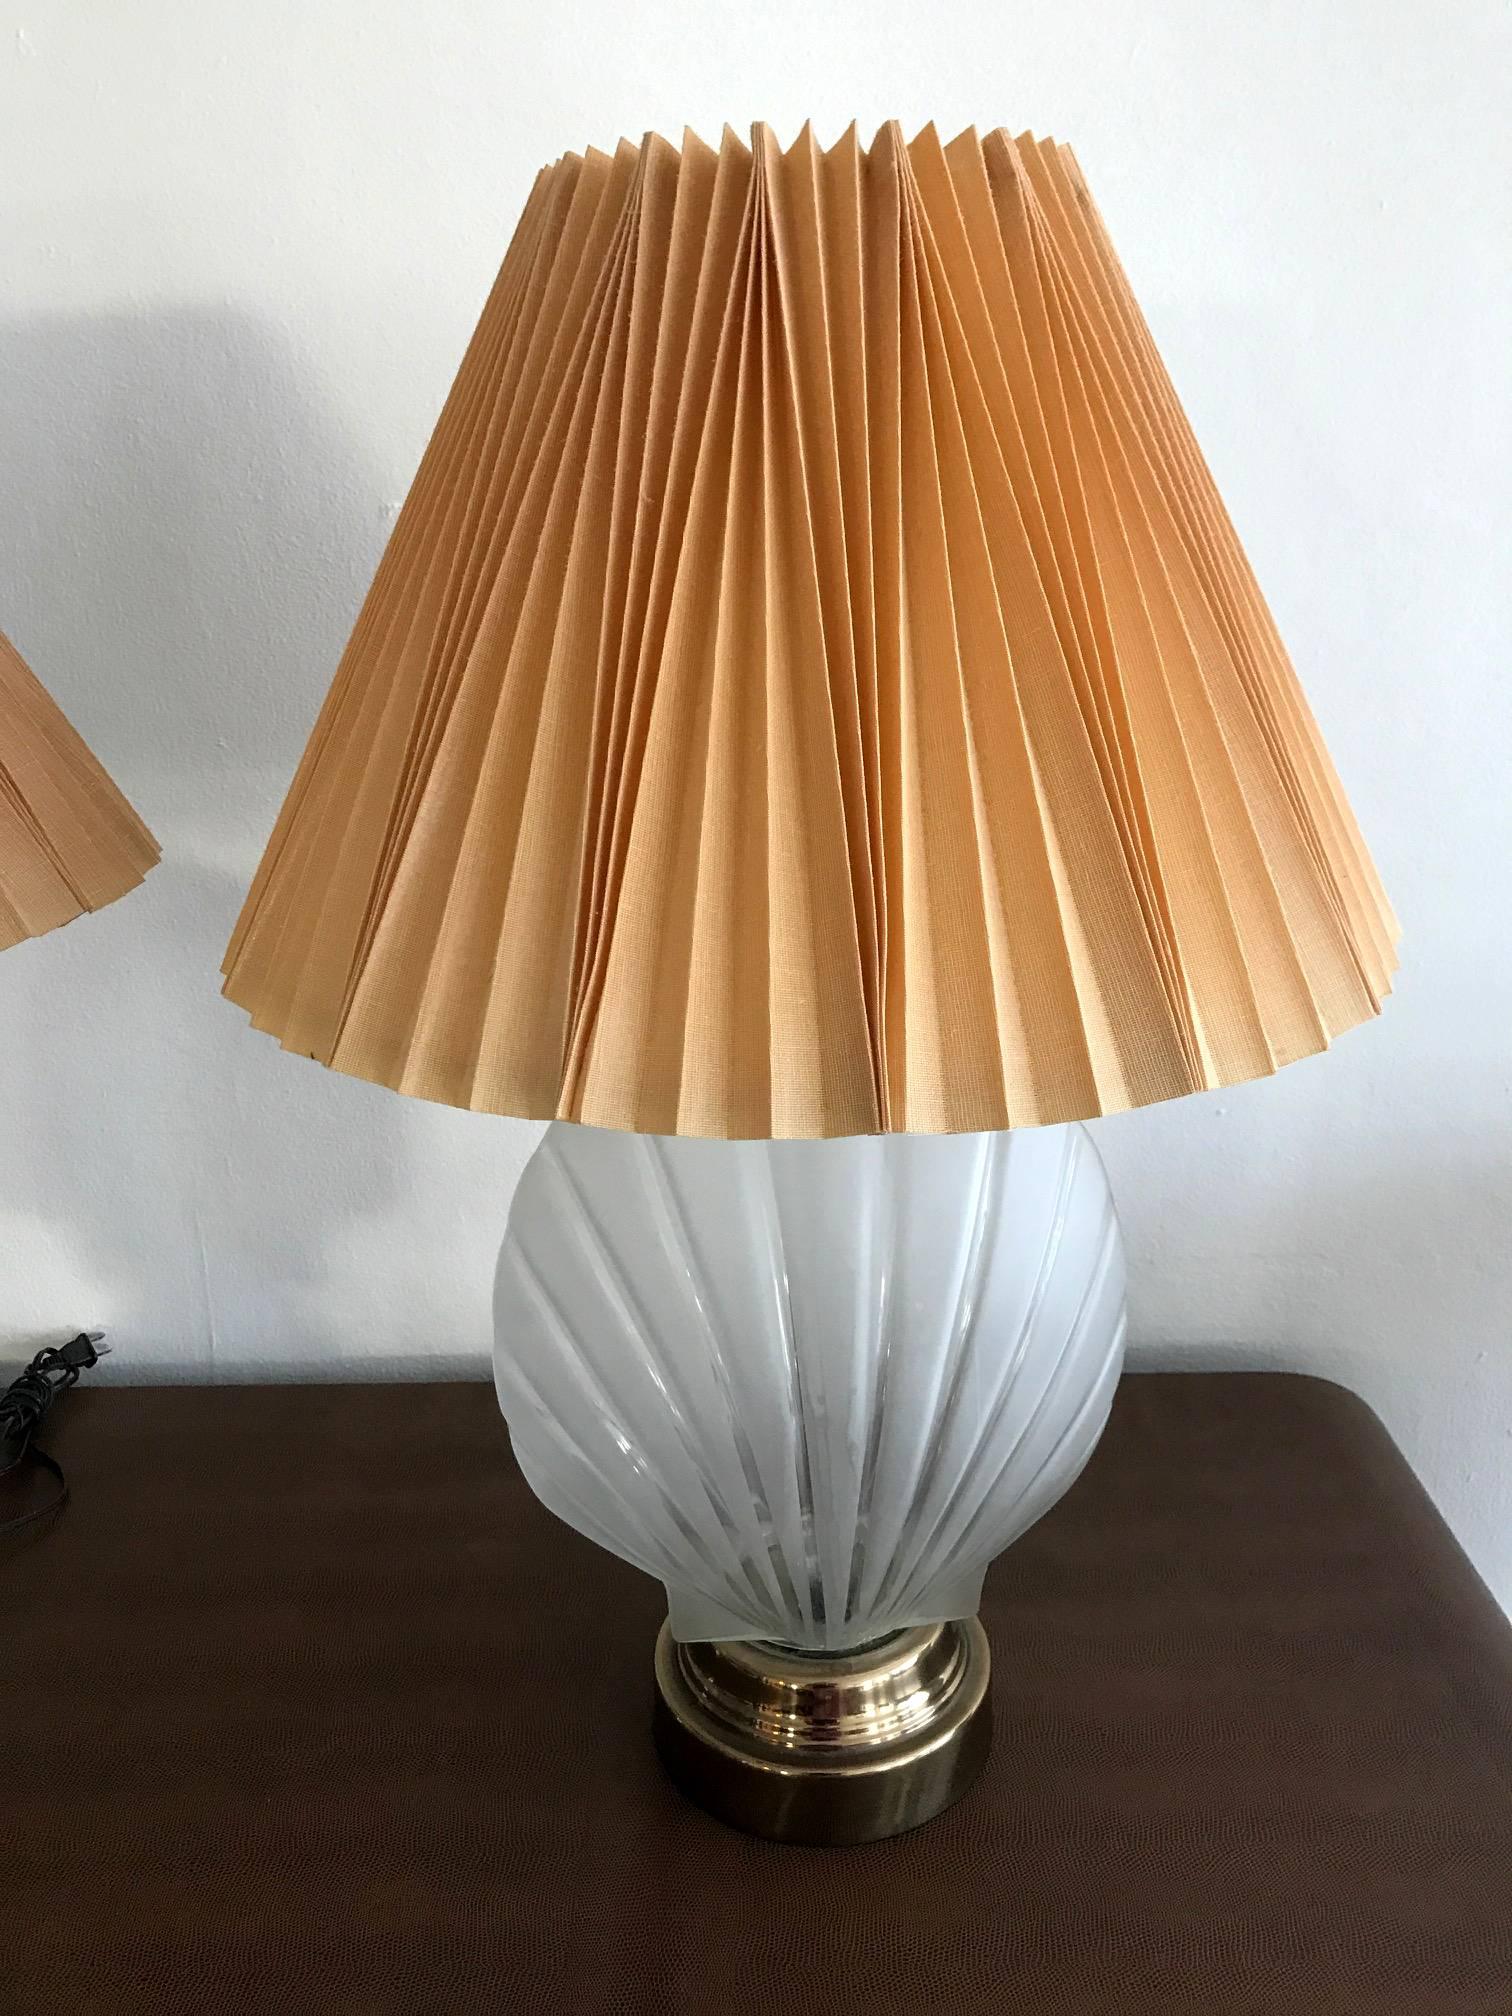 Hollywood Regency Pair of Shell Form Glass Table Lamps For Sale